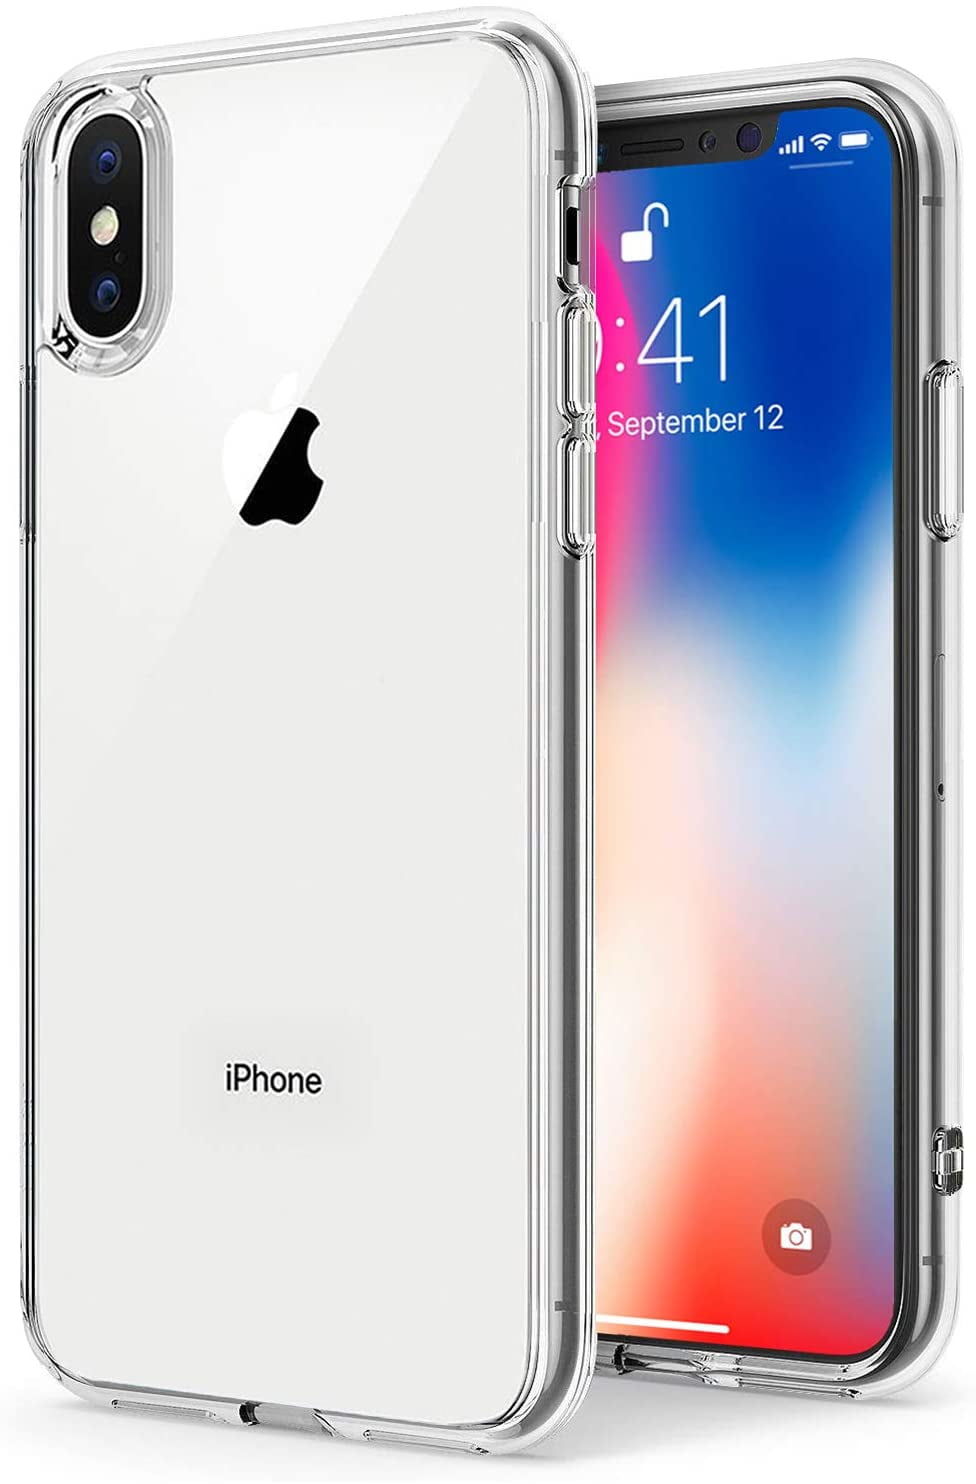 Inspecteur Defecte Dierentuin s nachts Phone Case Compatible with Apple iPhone Xs and iPhone X/10, Crystal Clear  Ultra Slim Cases Soft TPU Cover Full Protective Bumper - Walmart.com